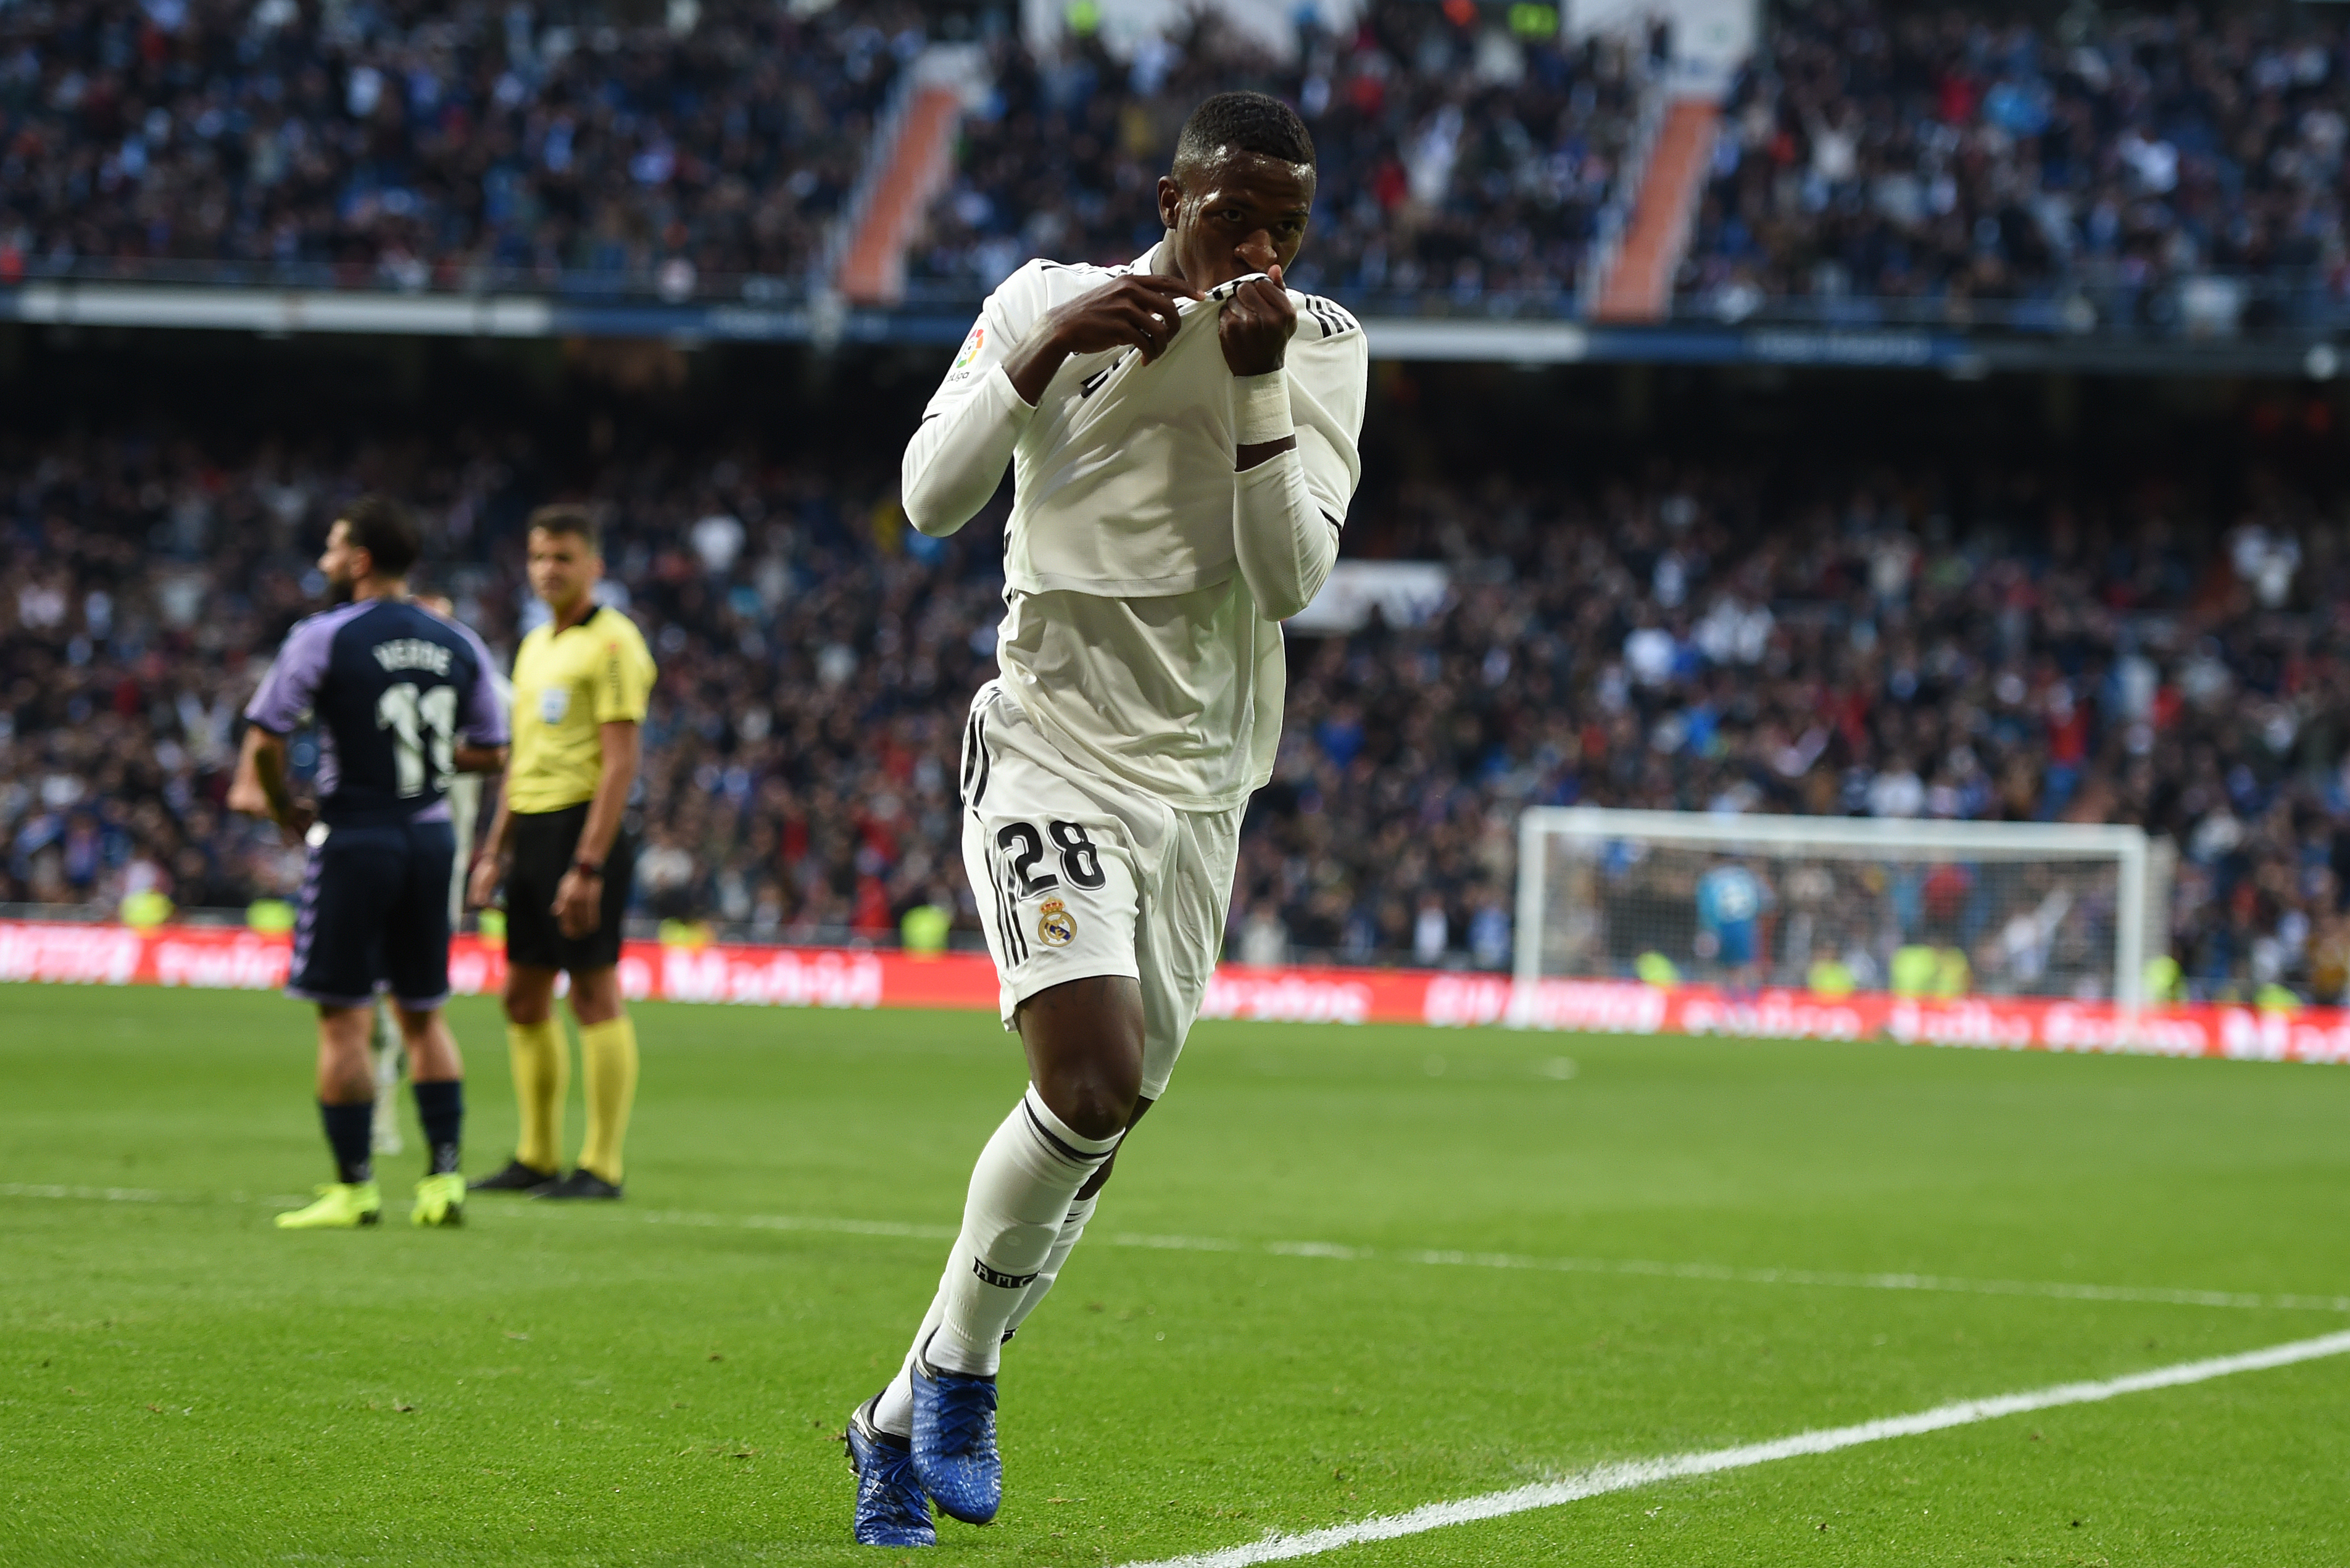 MADRID, SPAIN - NOVEMBER 03: Vinicius Junior of Real Madrid celebrates after scoring their opening goal during the La Liga match between Real Madrid CF and Real Valladolid CF at Estadio Santiago Bernabeu on November 03, 2018 in Madrid, Spain. (Photo by Denis Doyle/Getty Images)